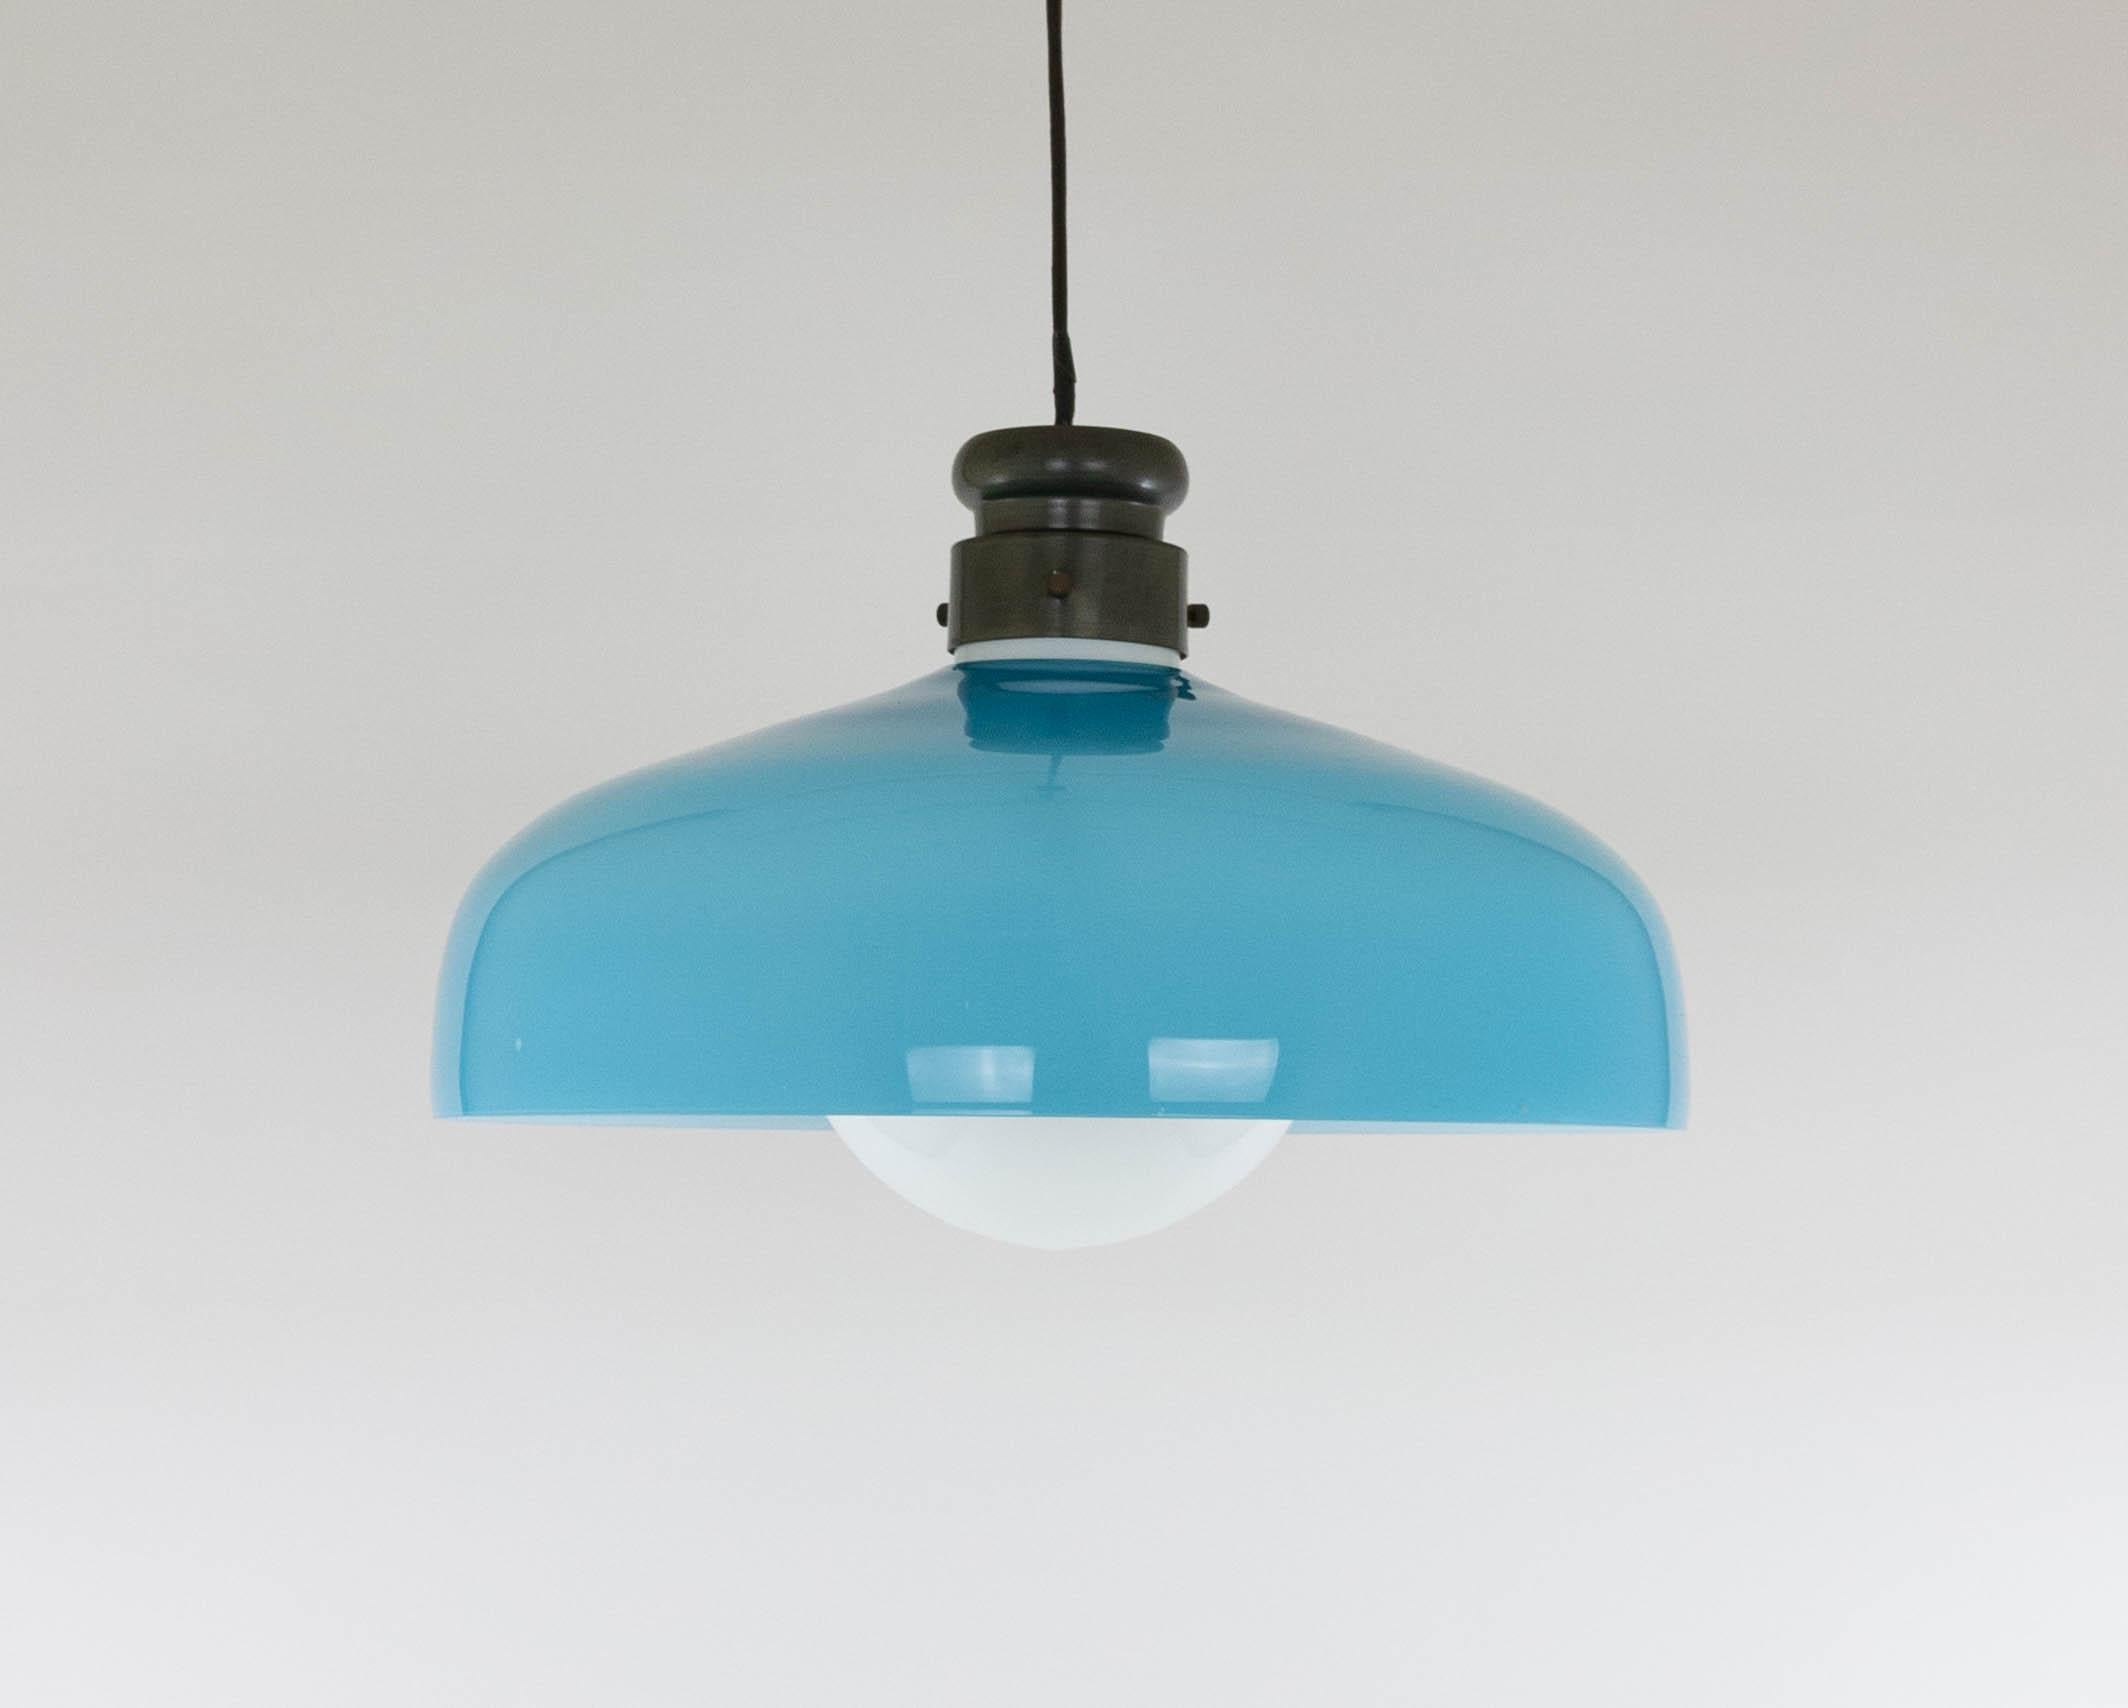 Large Model L 72 glass pendant designed in the 1960s by Alessandro Pianon for Vetreria Vistosi in Murano.

The lamp is in very good vintage condition and comes with the original metal ceiling cap. 